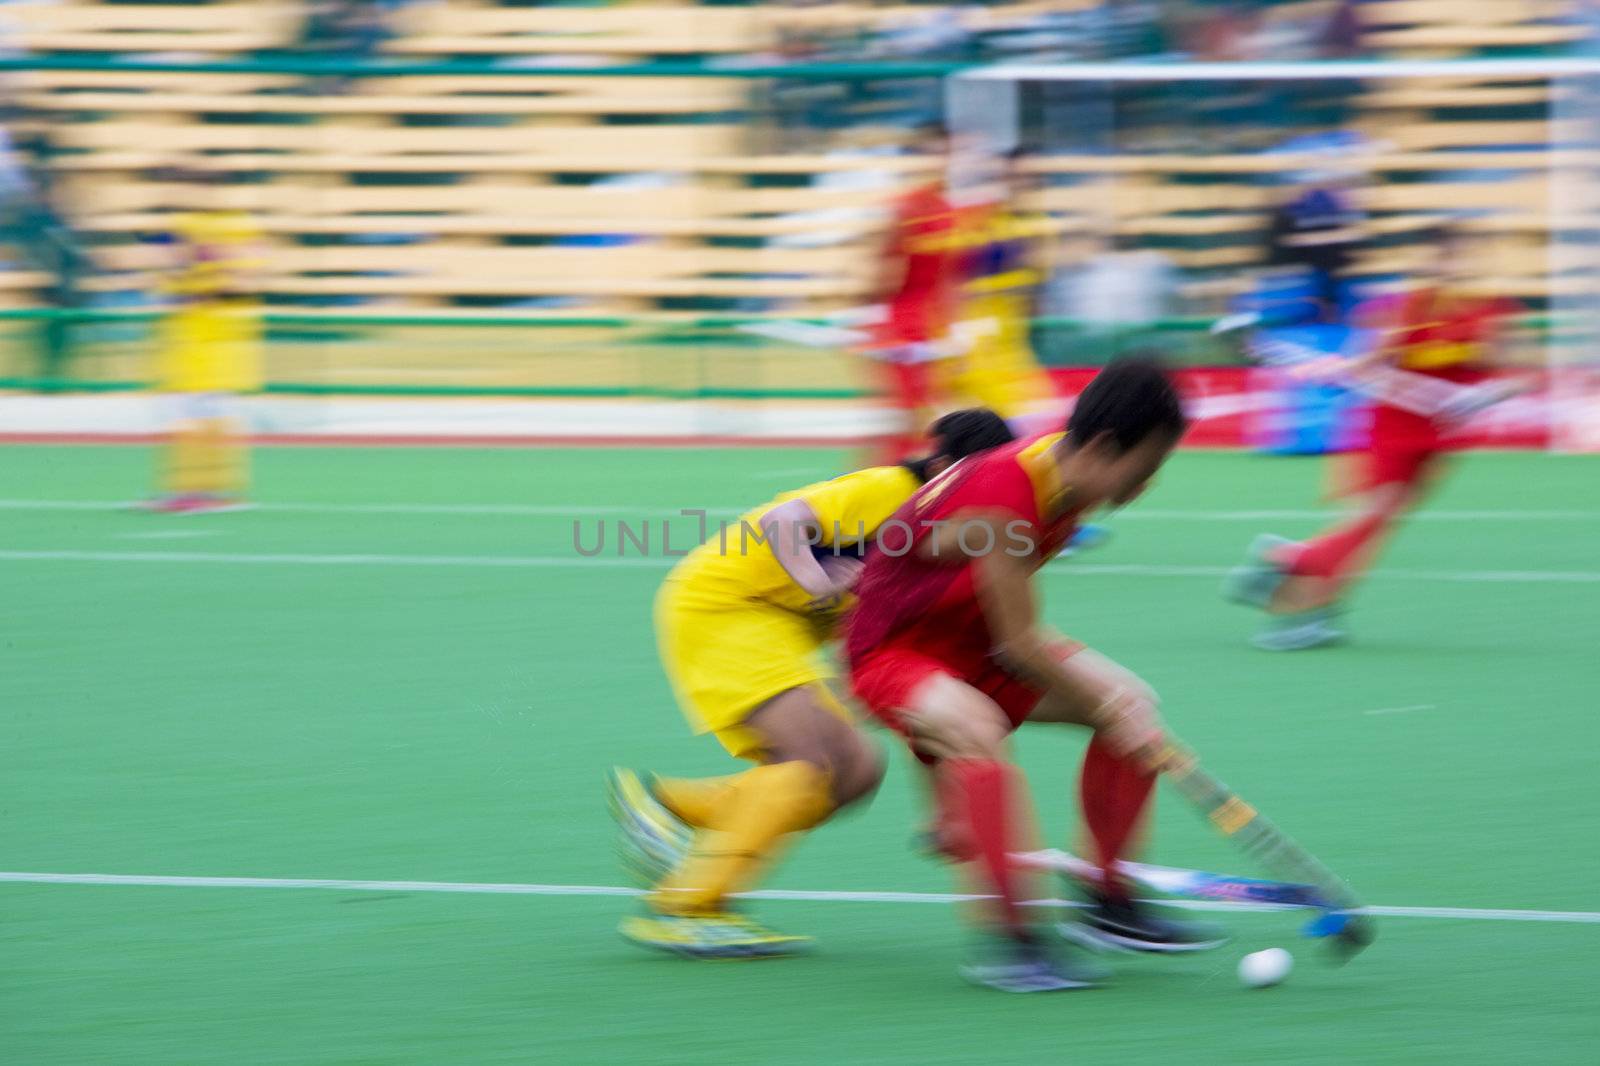 Image of men's field hockey players in action. Image intentionally blurred to portray speed.